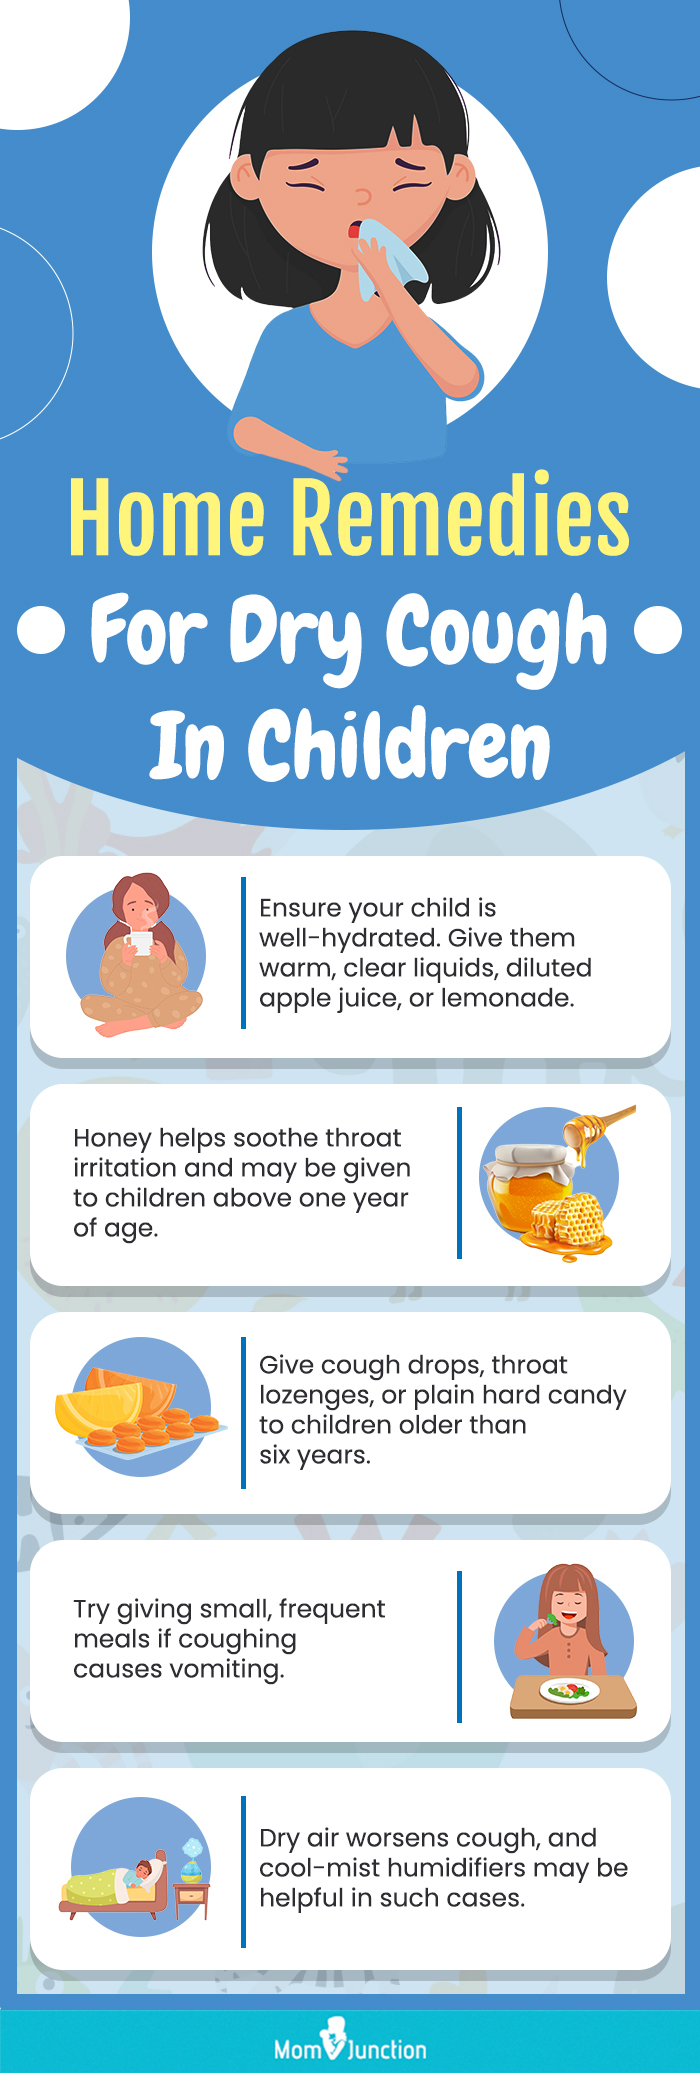  home remedies for dry cough in children(infographic)